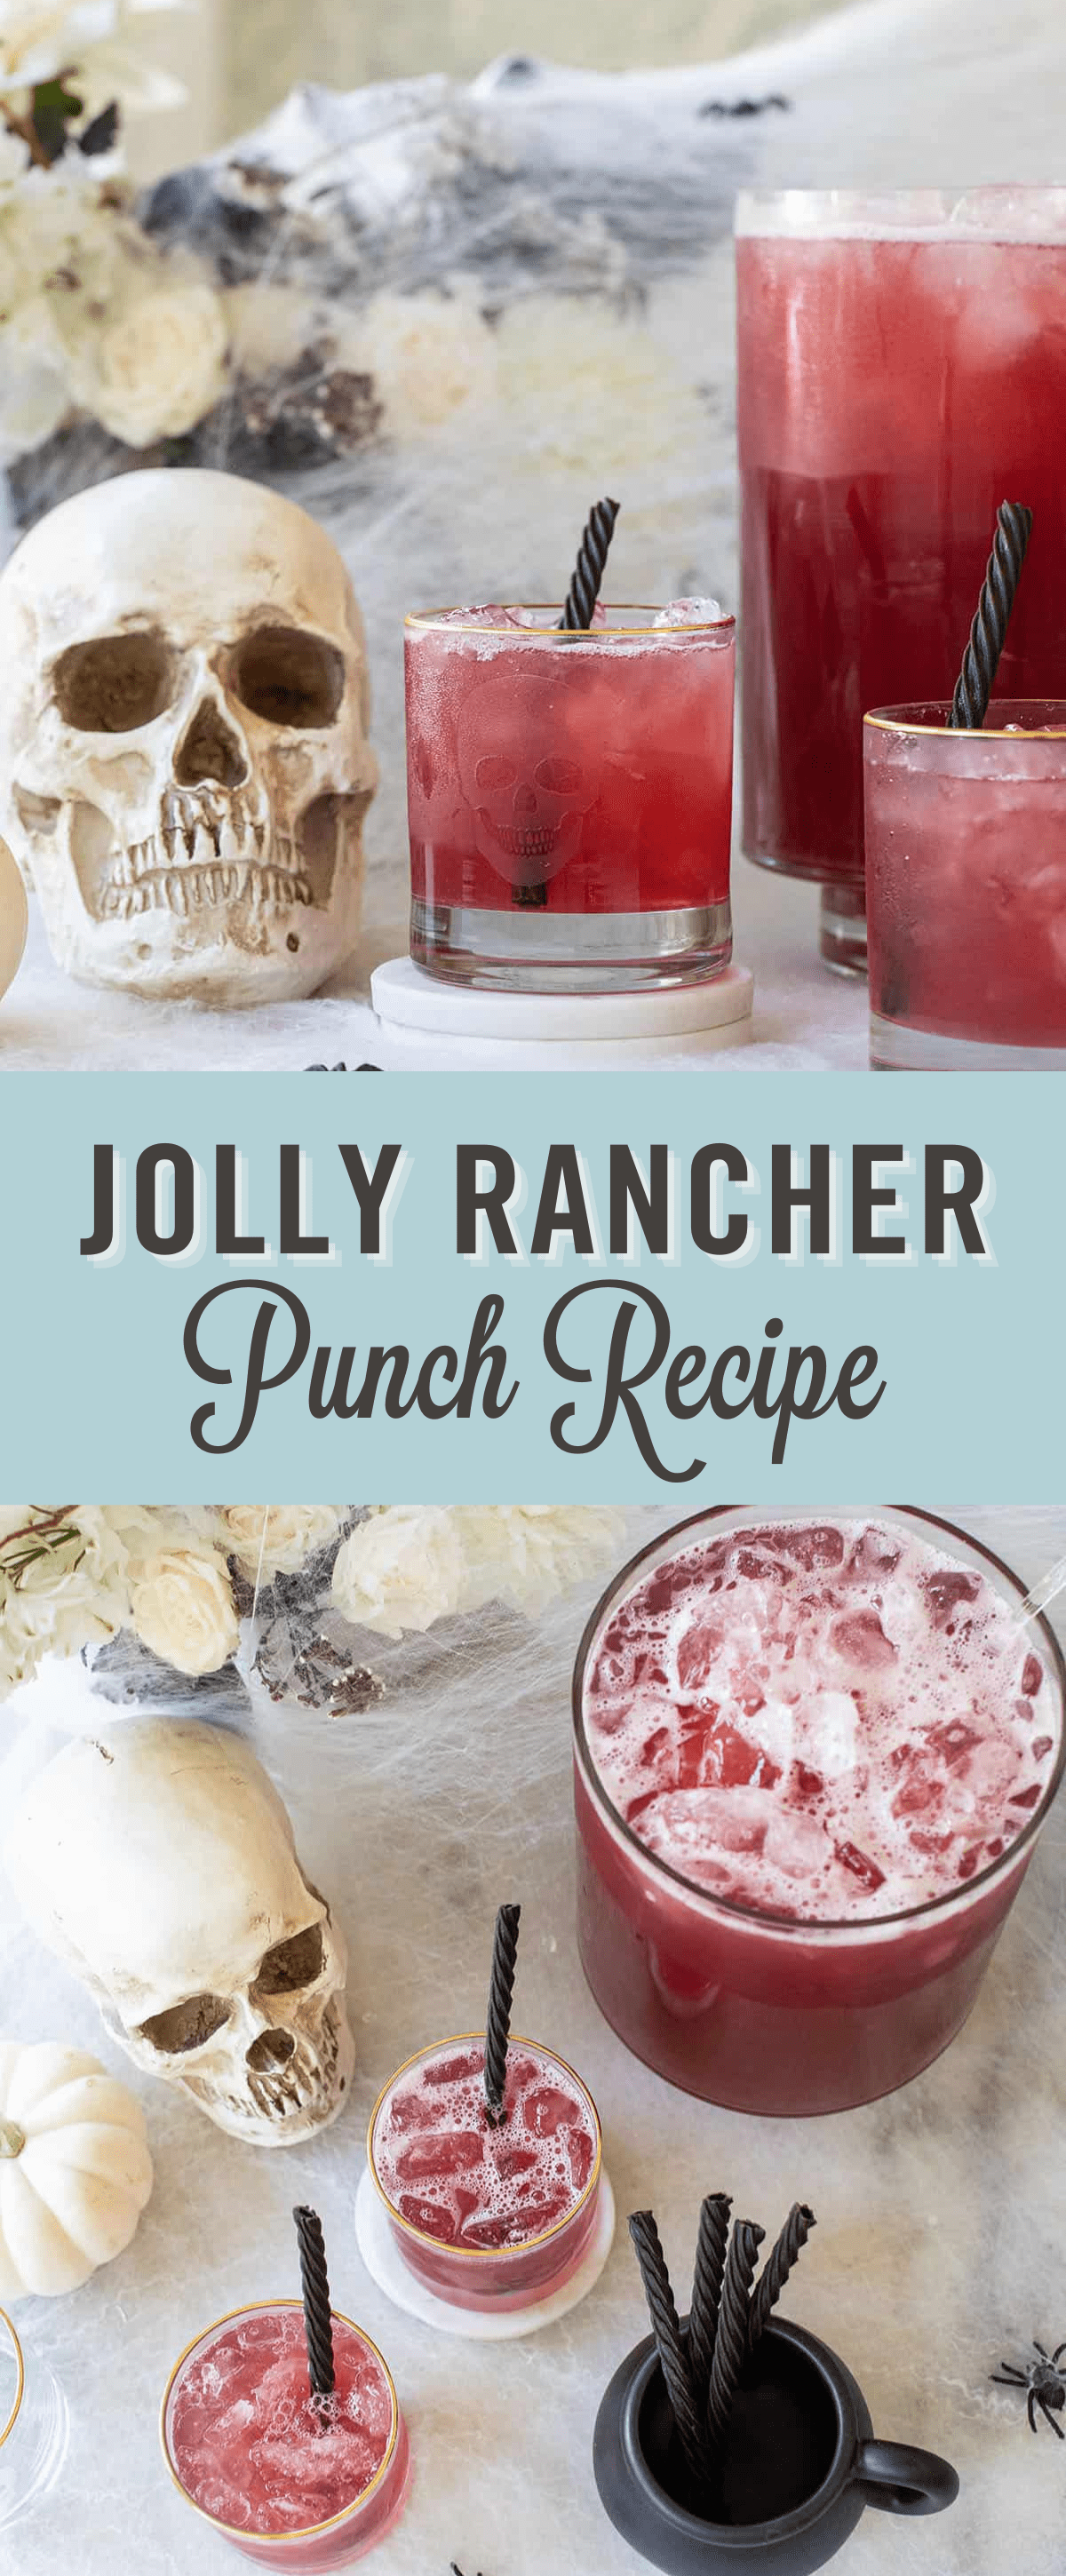 Jolly rancher punch recipe long image with title.